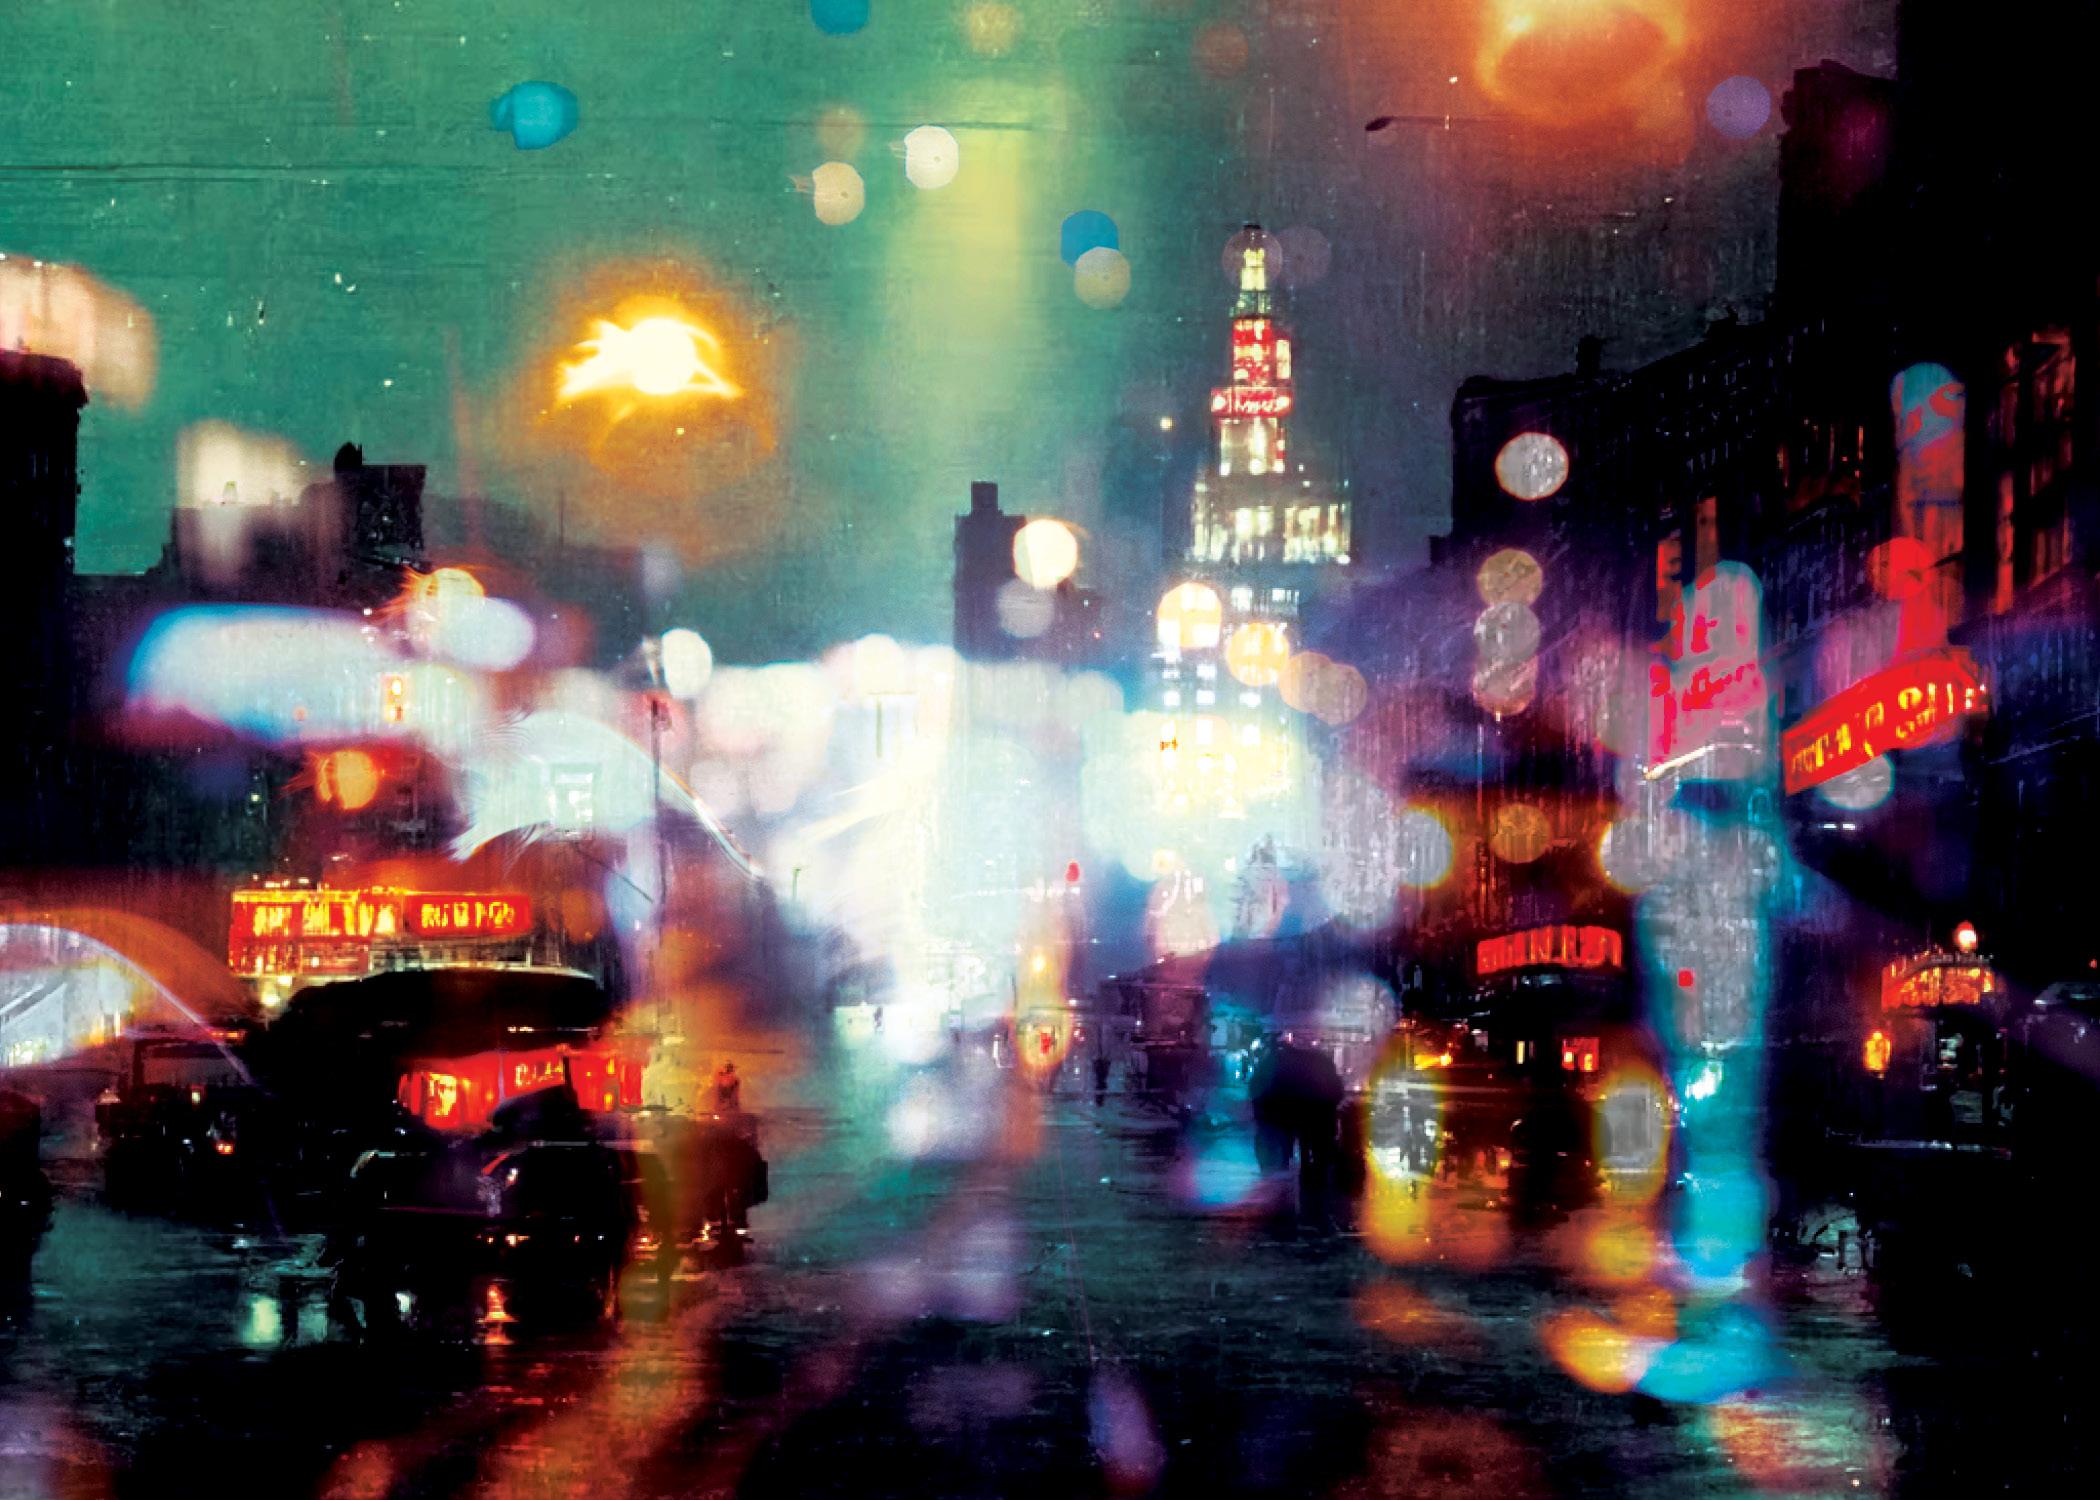 grainy, blurry, colorful image: city lights glow and reflect on a rainy street scene